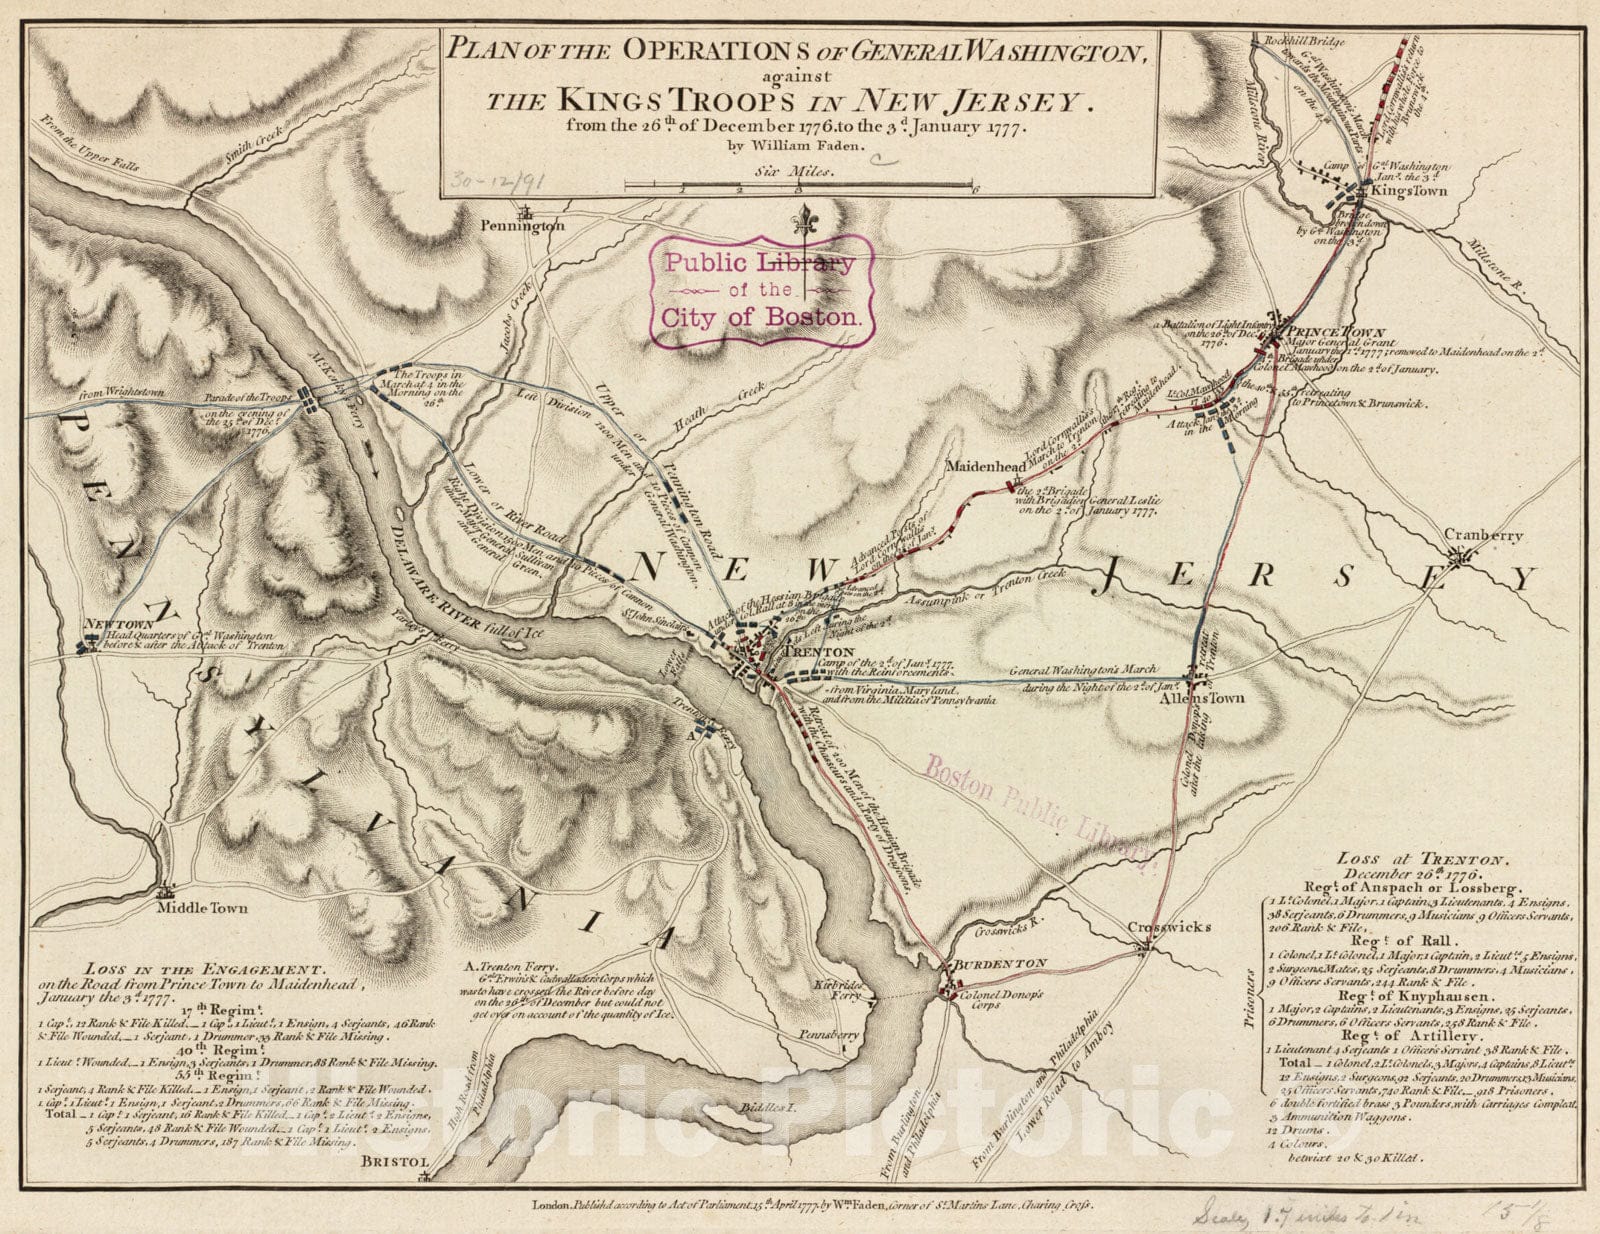 Historical Map, Plan of The Operations of General Washington, Against The Kings Troops in New Jersey : from The 26th. of December 1776, to The 3D. January 1777, Vintage Wall Art